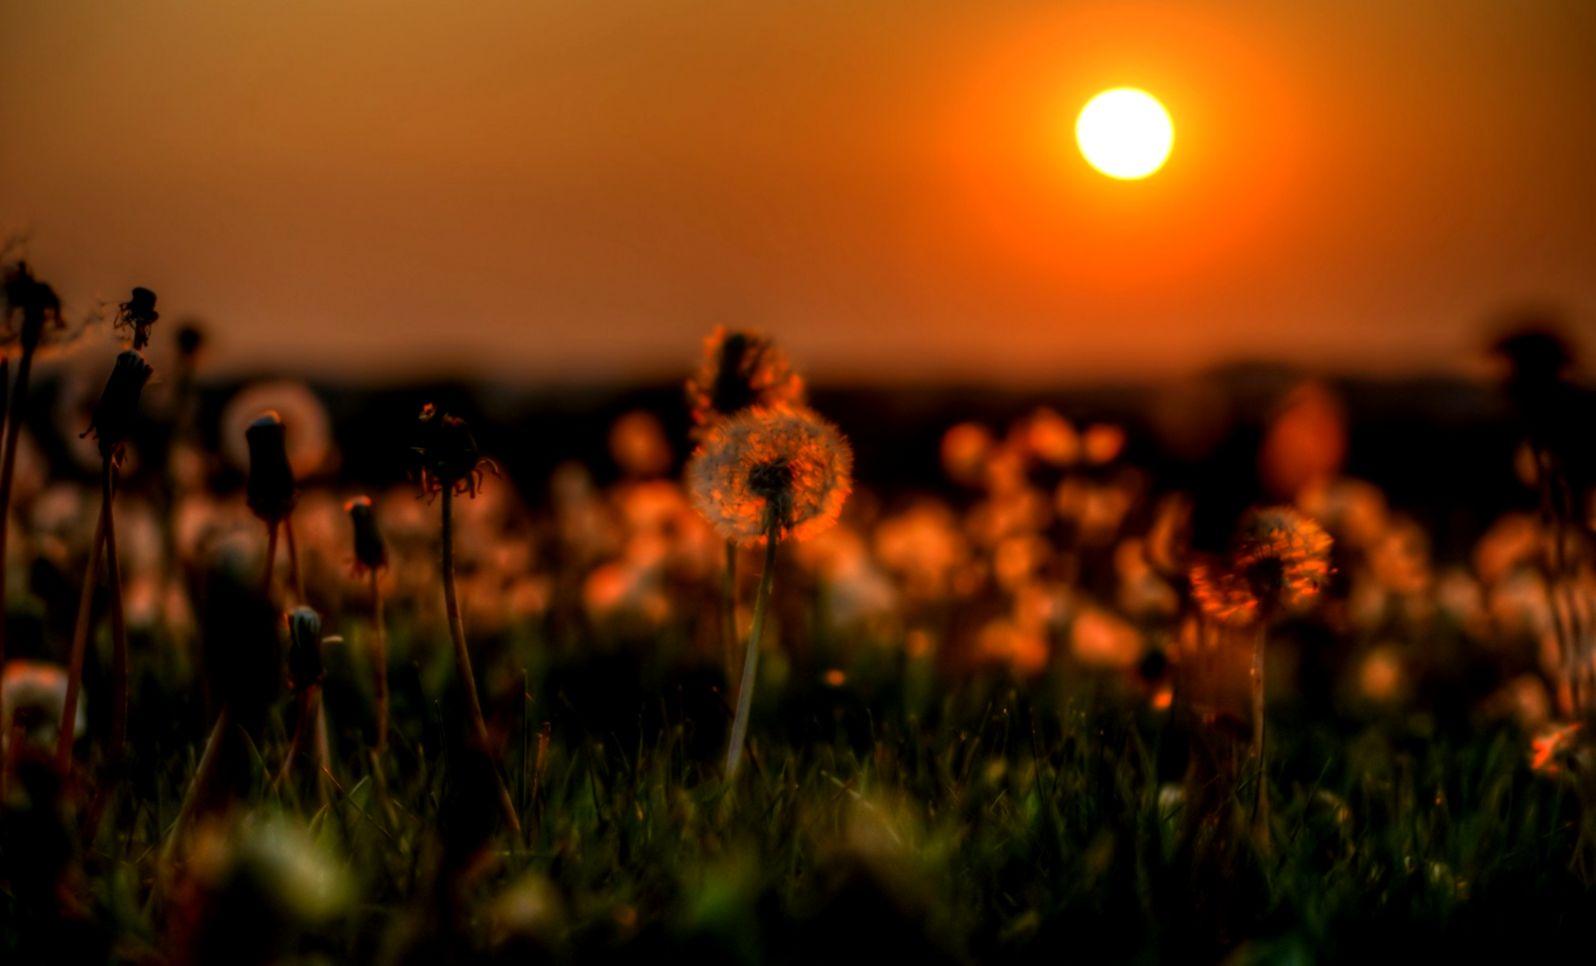 Flowers On The Sunset Wallpapers - Wallpaper Cave